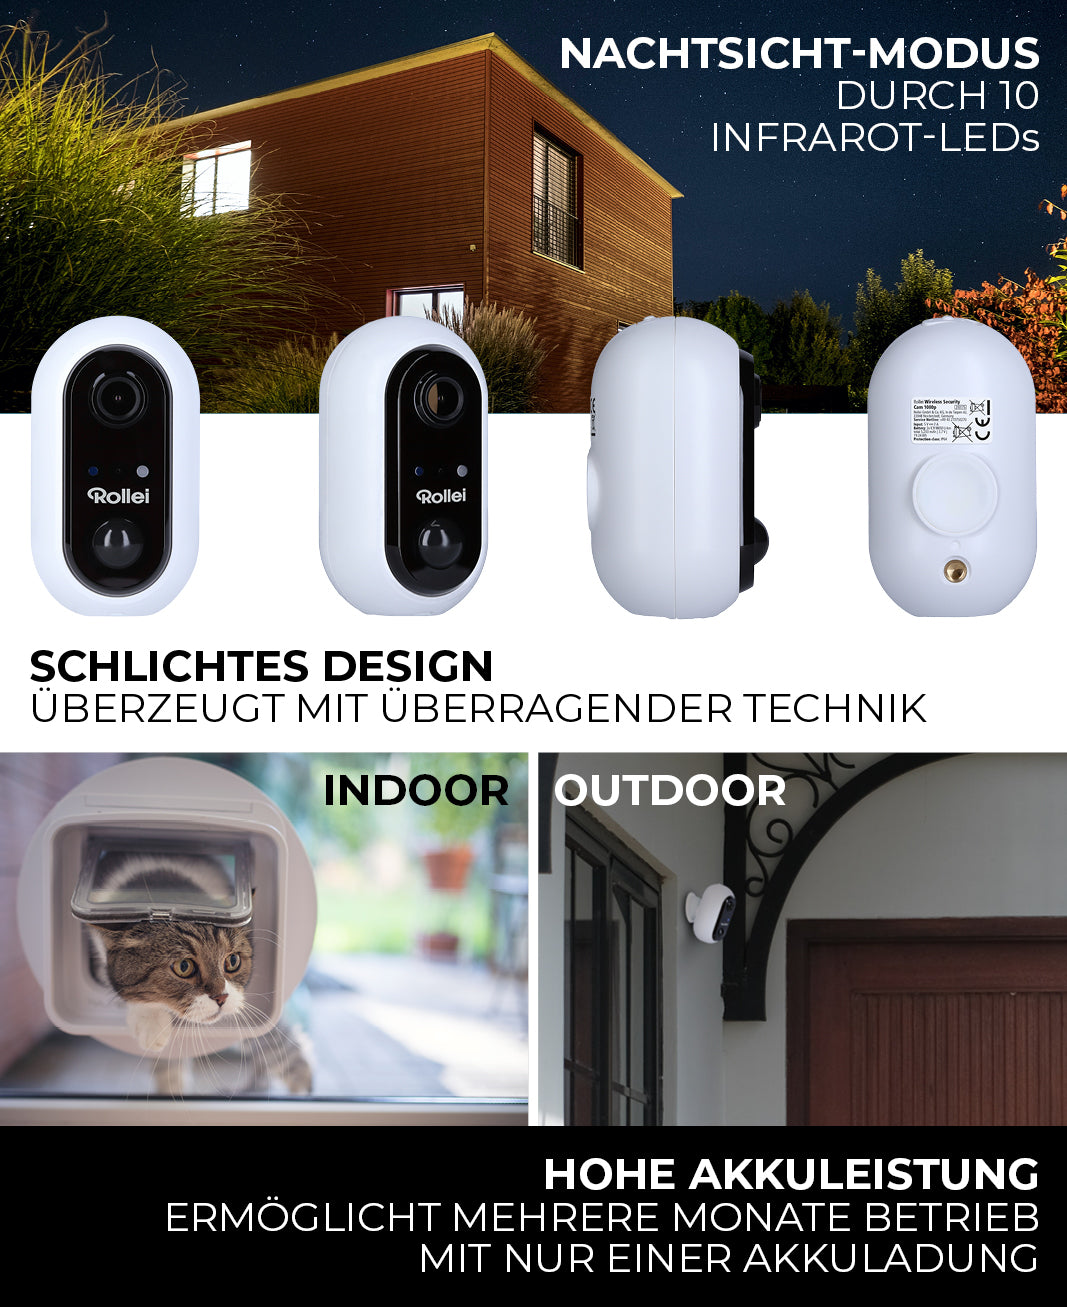 Security camera with night vision mode and high battery power